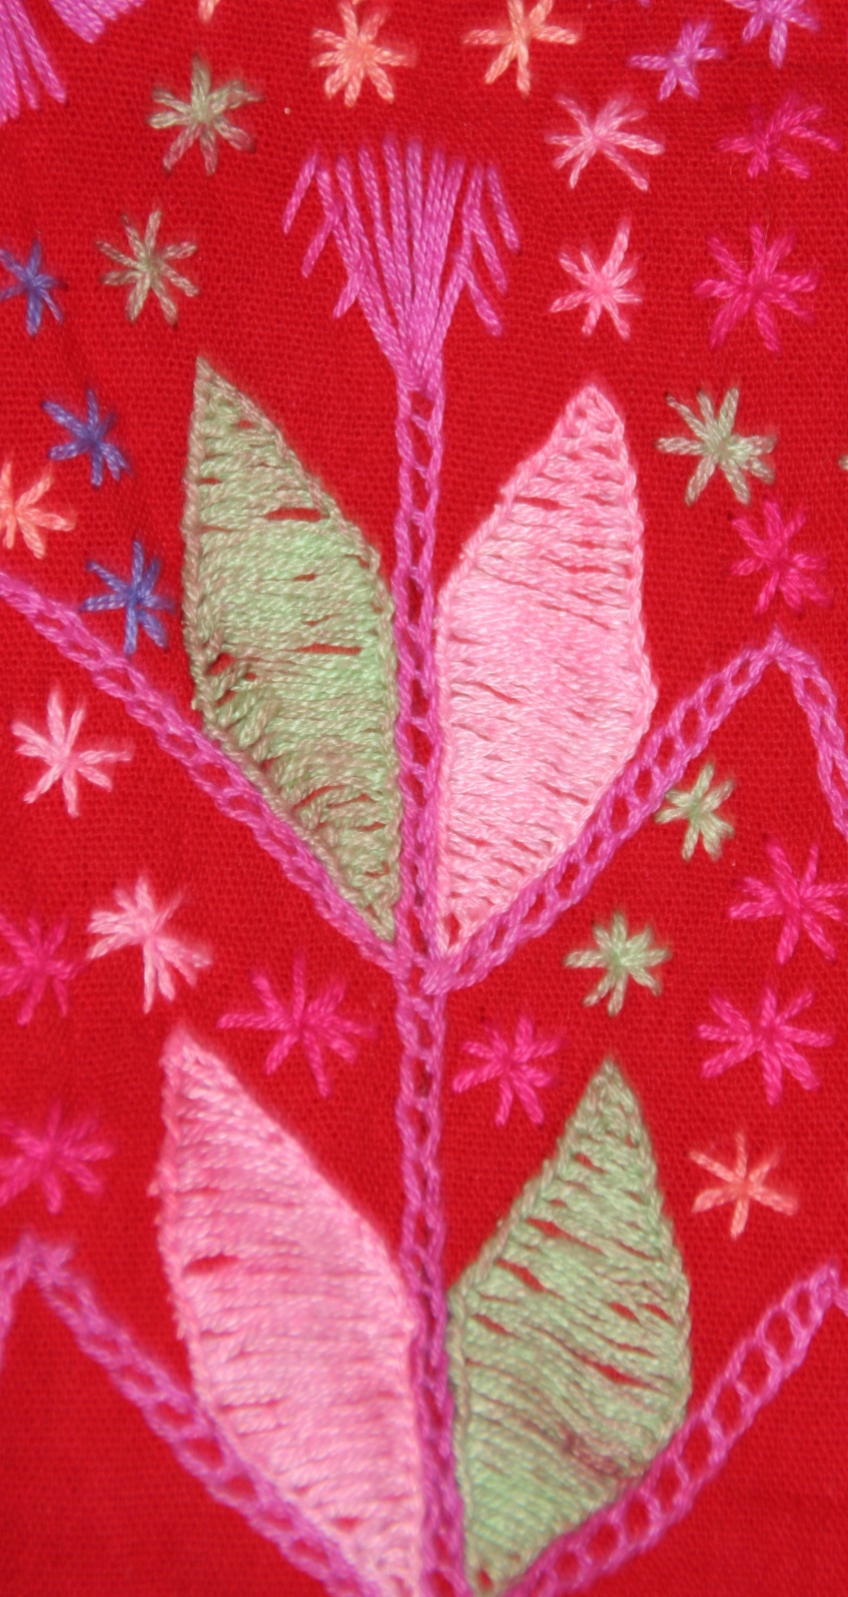 Corn Symbol from an Embroidered Shirt